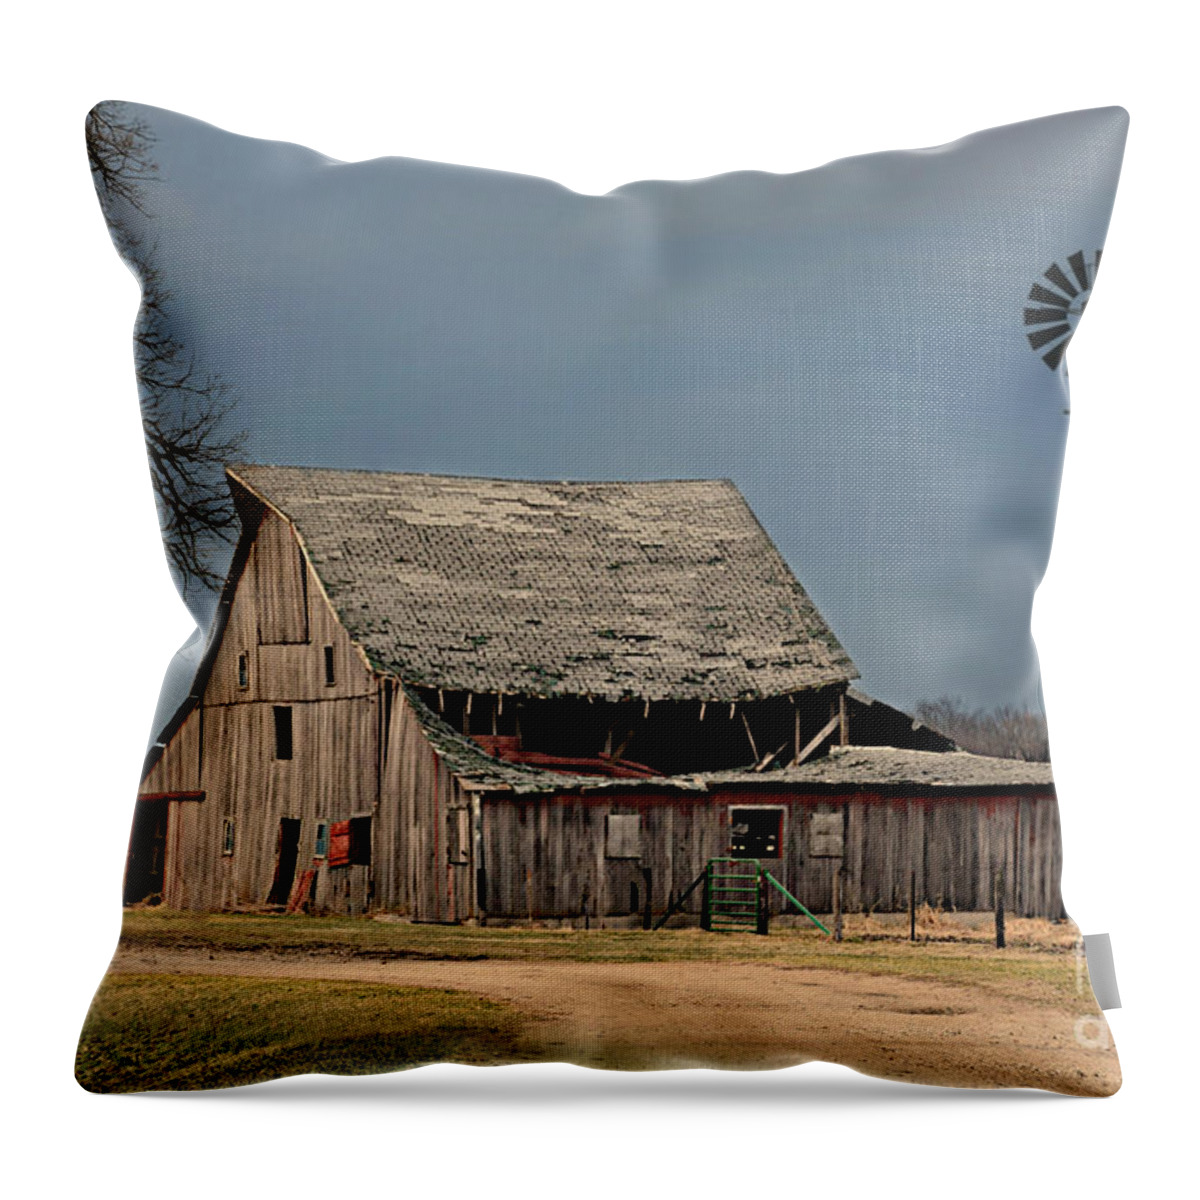 Country Roof Collapse Throw Pillow featuring the photograph Country Roof Collapse by Kathy M Krause